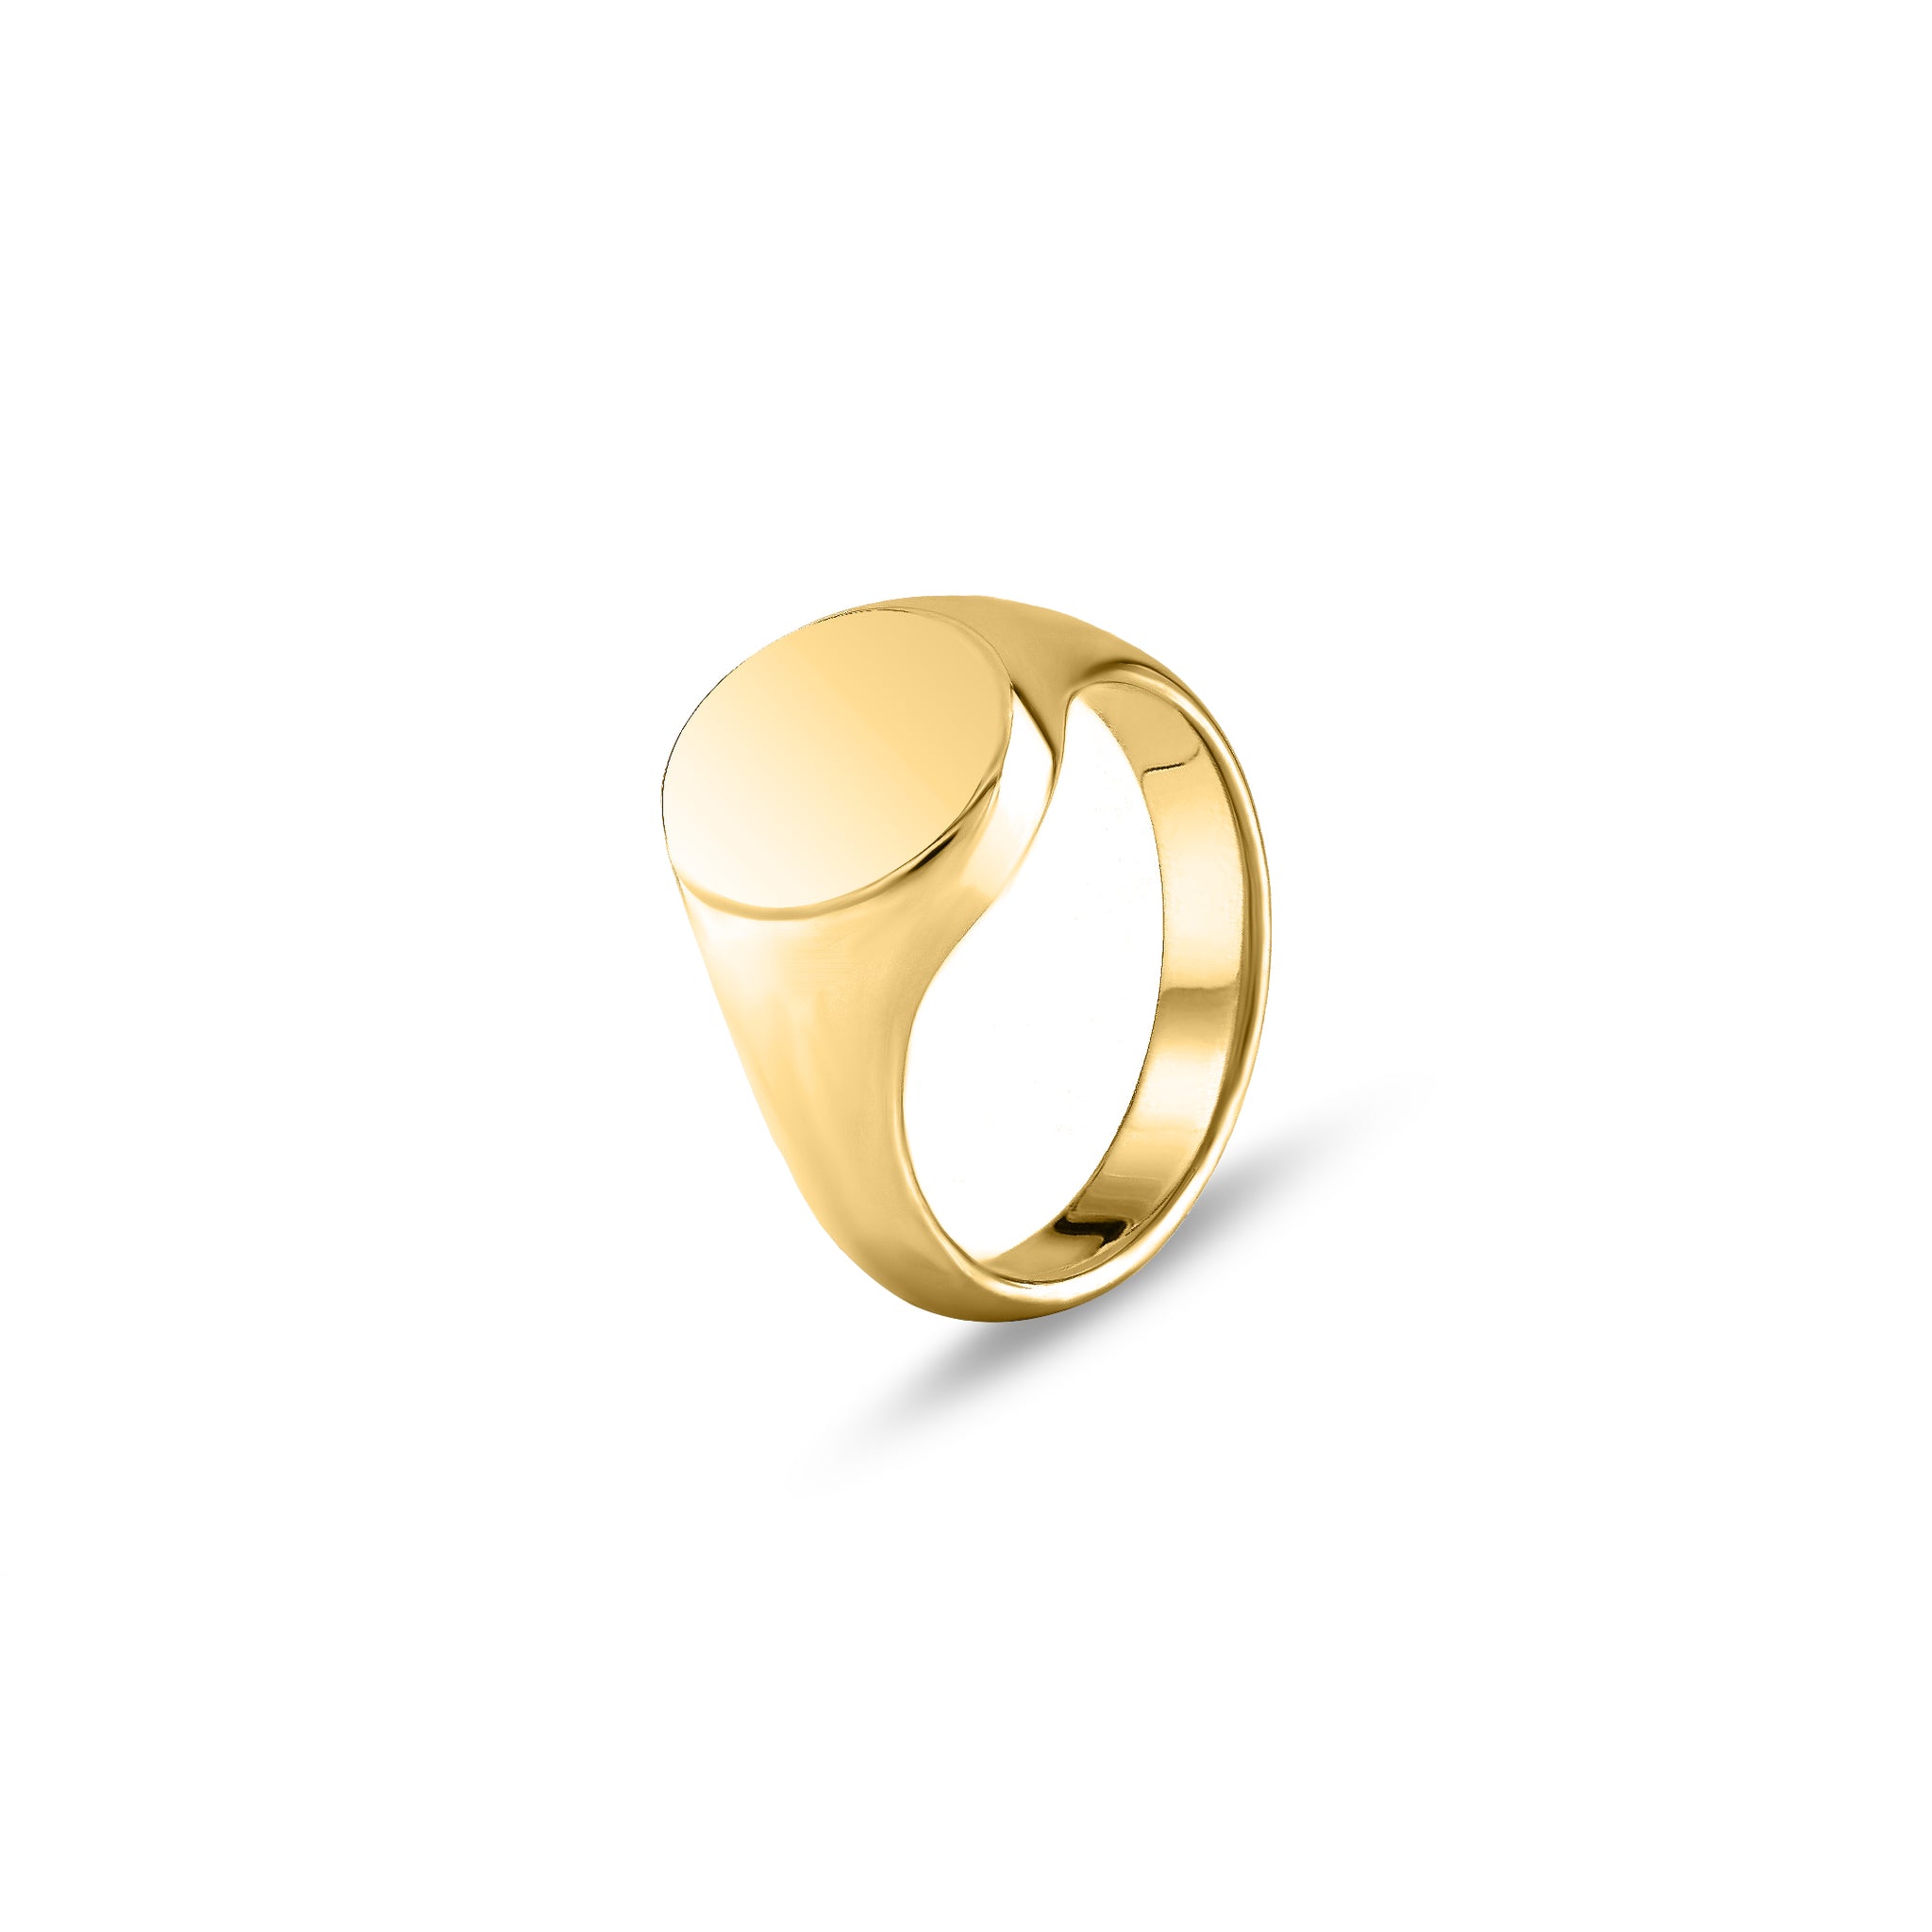 18ct Yellow Gold 13 x 11mm Oval Signet Ring